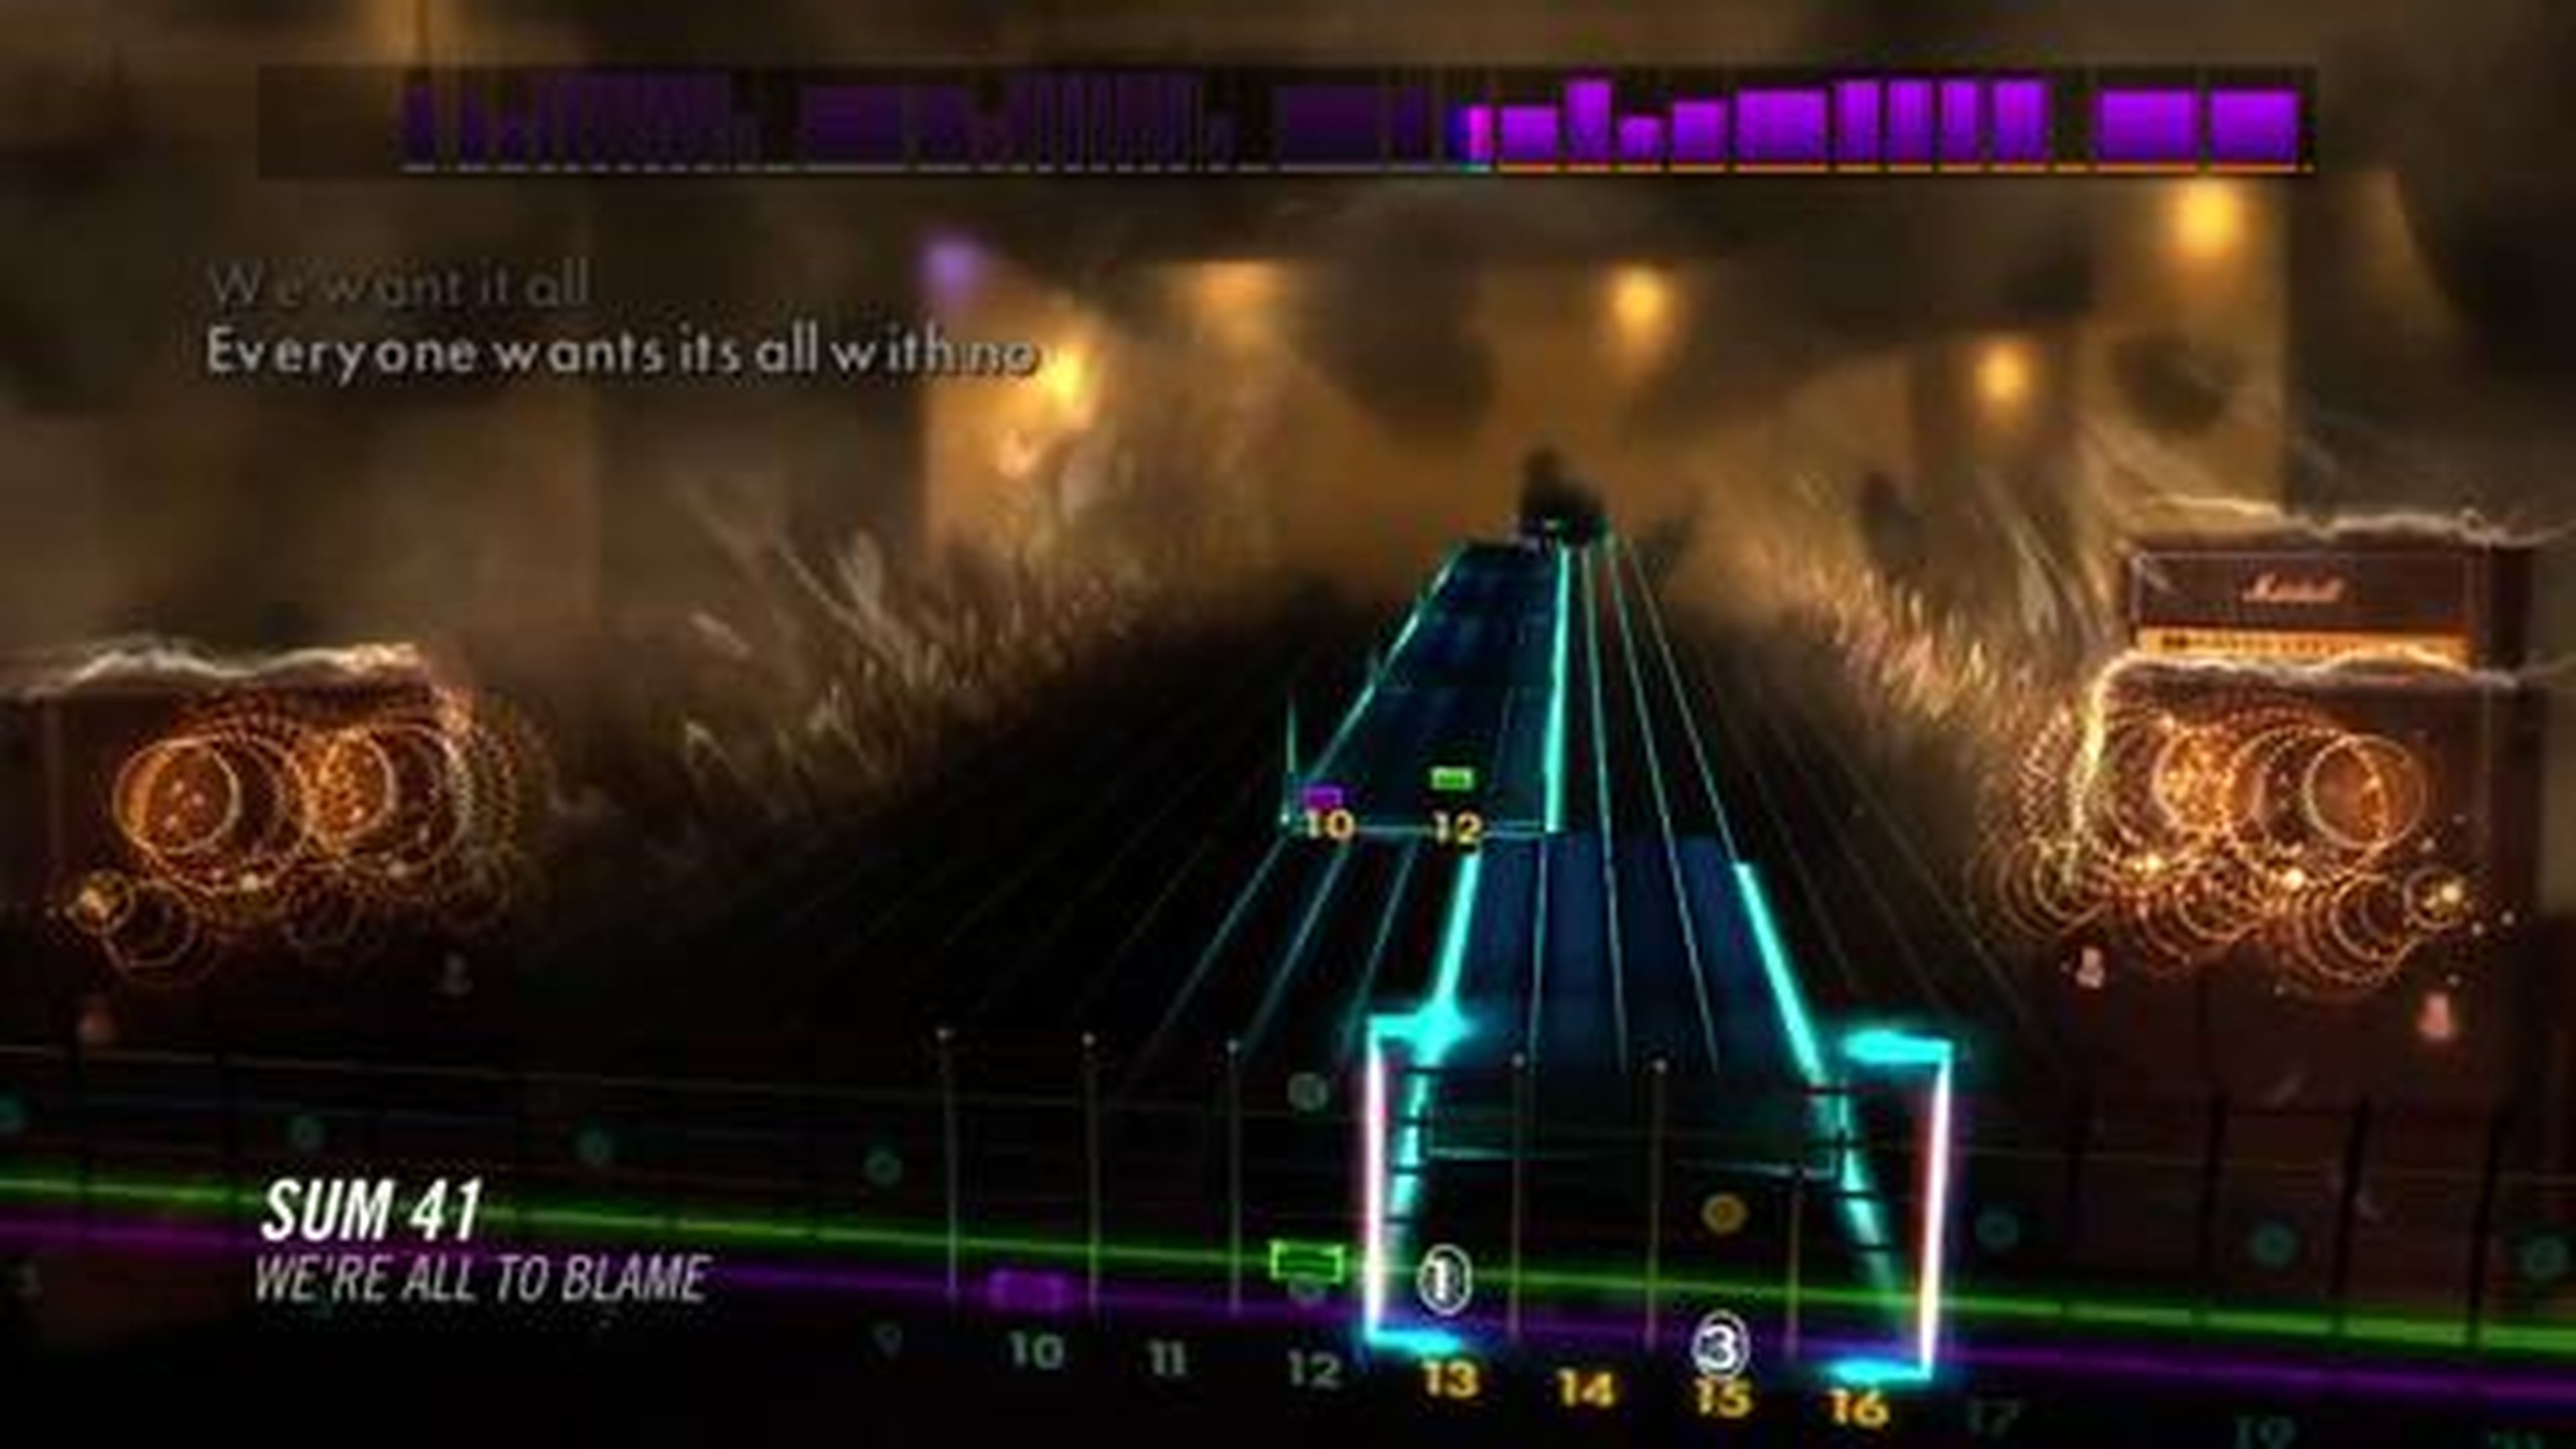 Rocksmith 2014 Edition - Sum 41 songs pack Trailer [Europe]